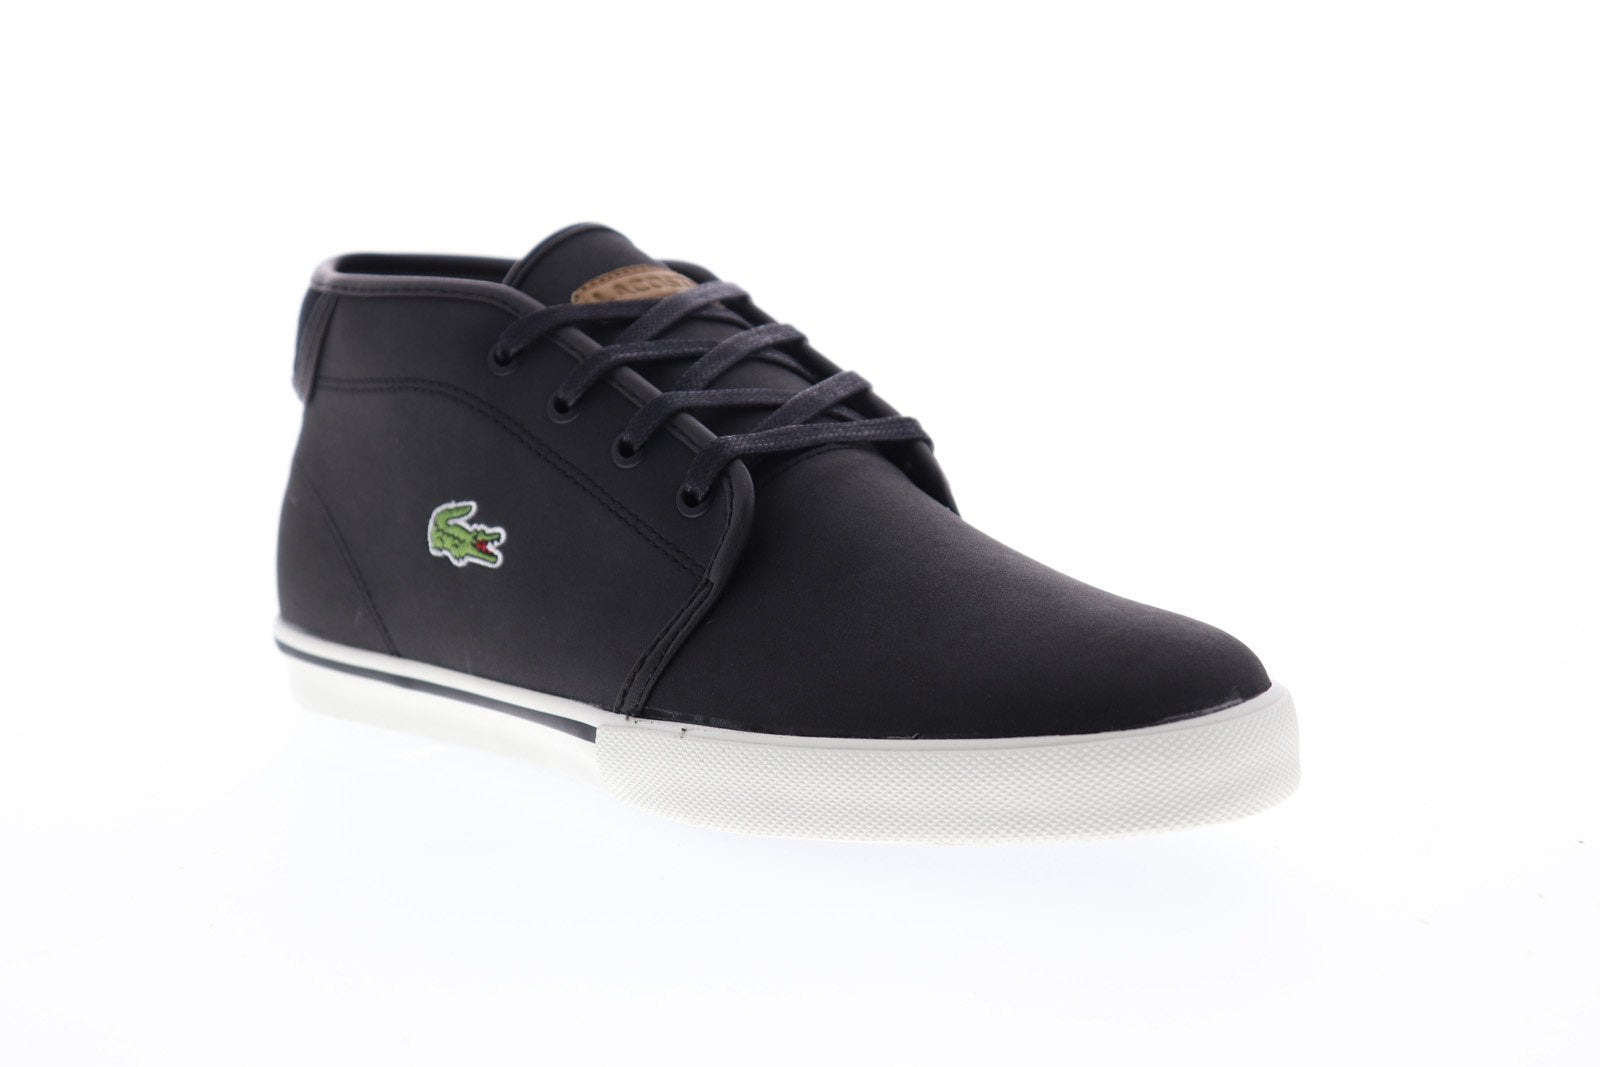 Lacoste 119 1 CMA Mens Black Mid Top Lace Up Lifestyle Sneake - Ruze Shoes